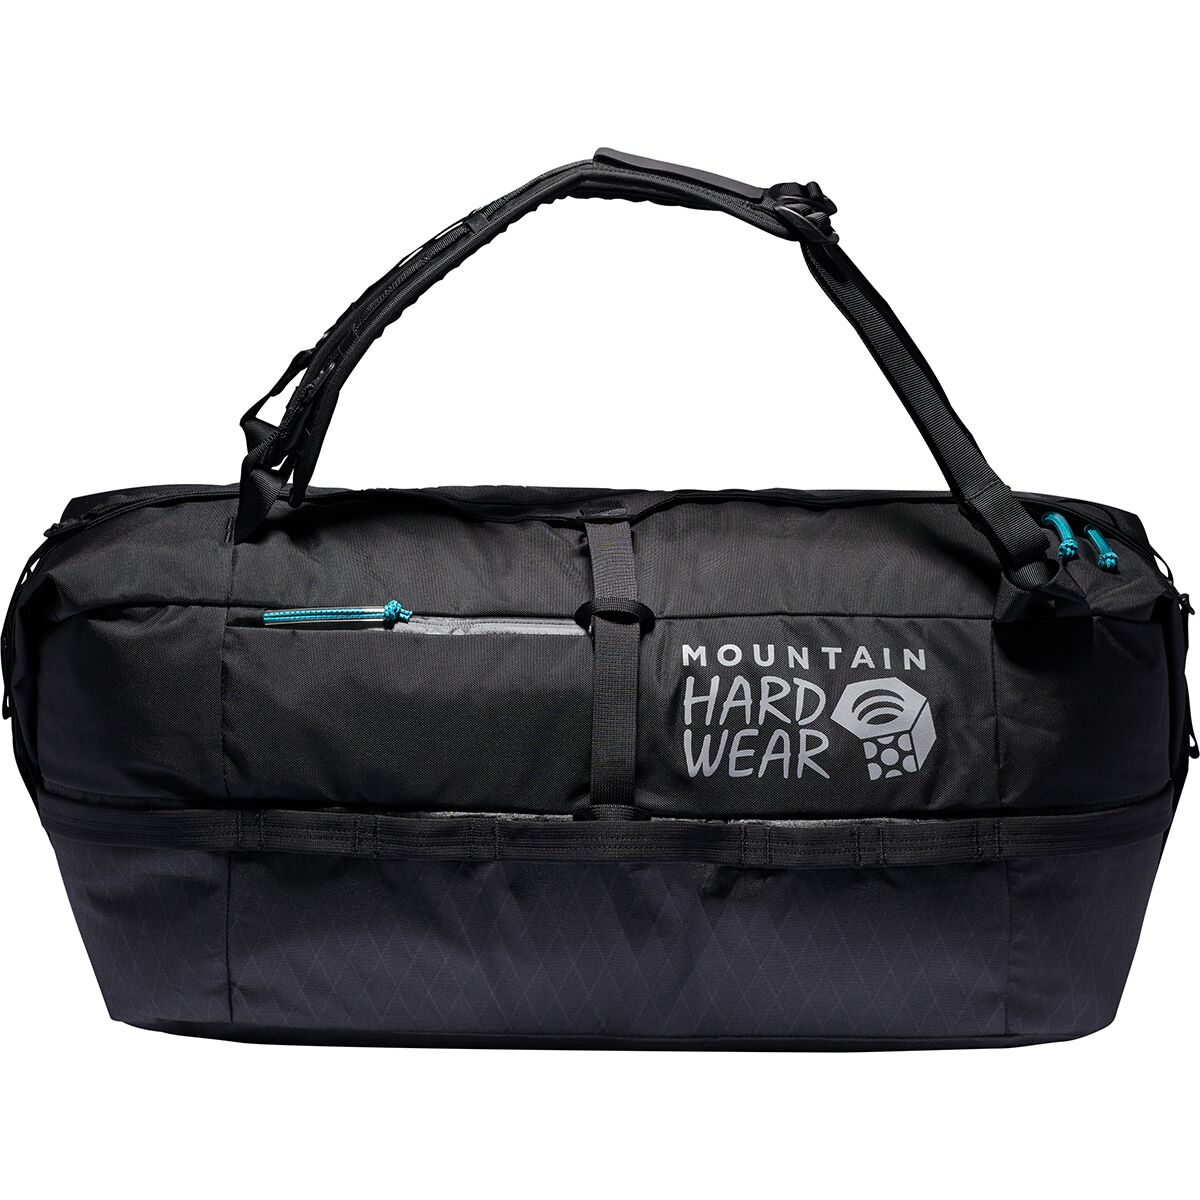 Expedition 50 Duffel Bag